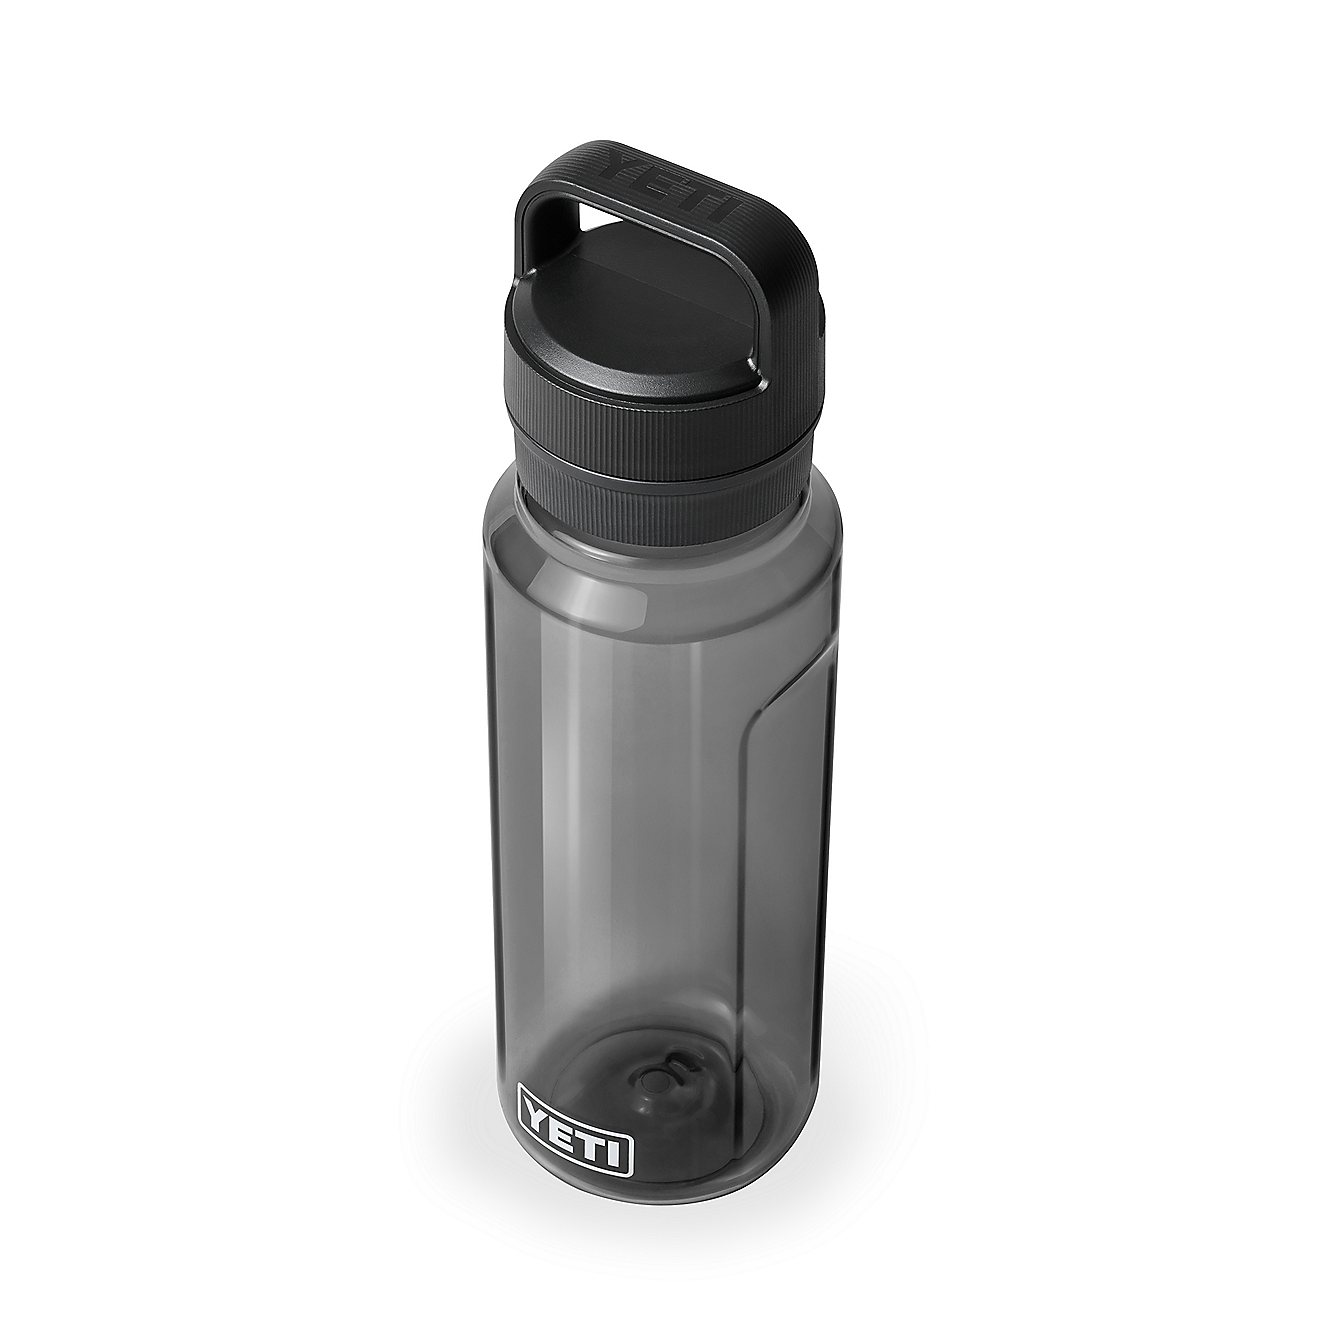 https://academy.scene7.com/is/image/academy//drinkware/yeti-yonder-1l-water-bottle-21071220005-black/9d1db16048314a98acacd90bccb79120?$pdp-mobile-gallery-ng$